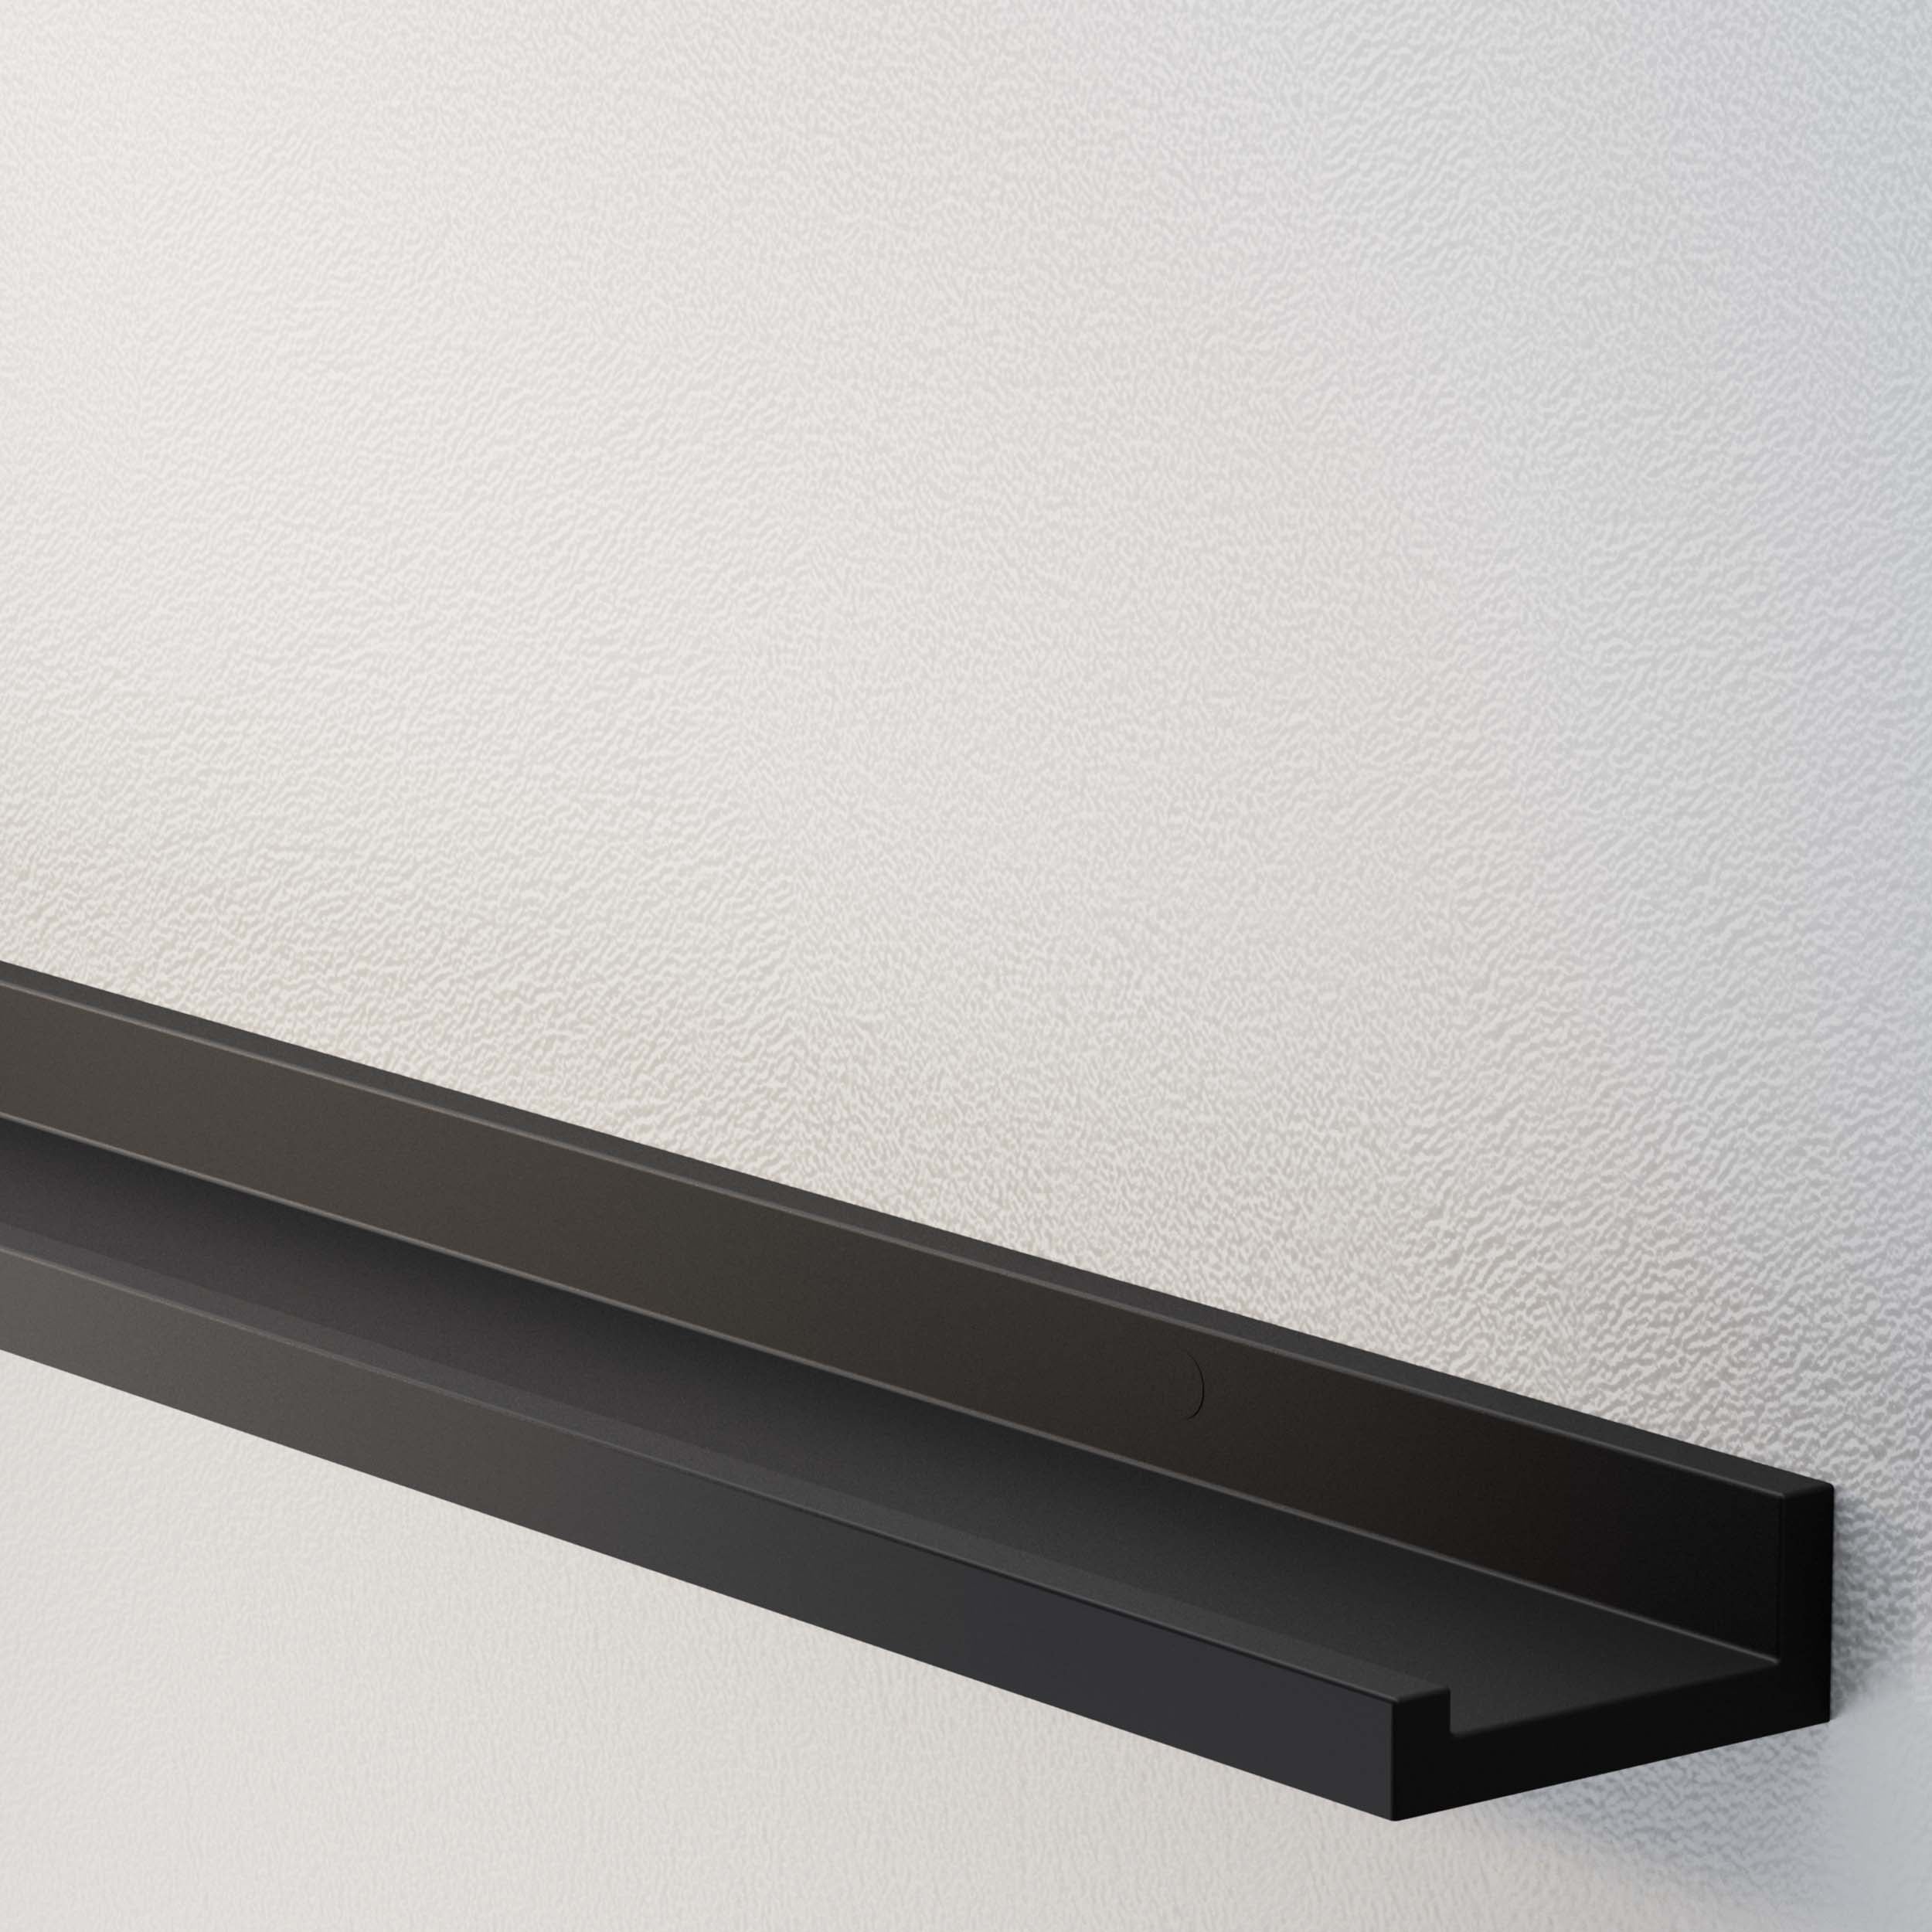 An empty black shelf for wall against a textured wall, presenting a clean and minimalist design aesthetic.